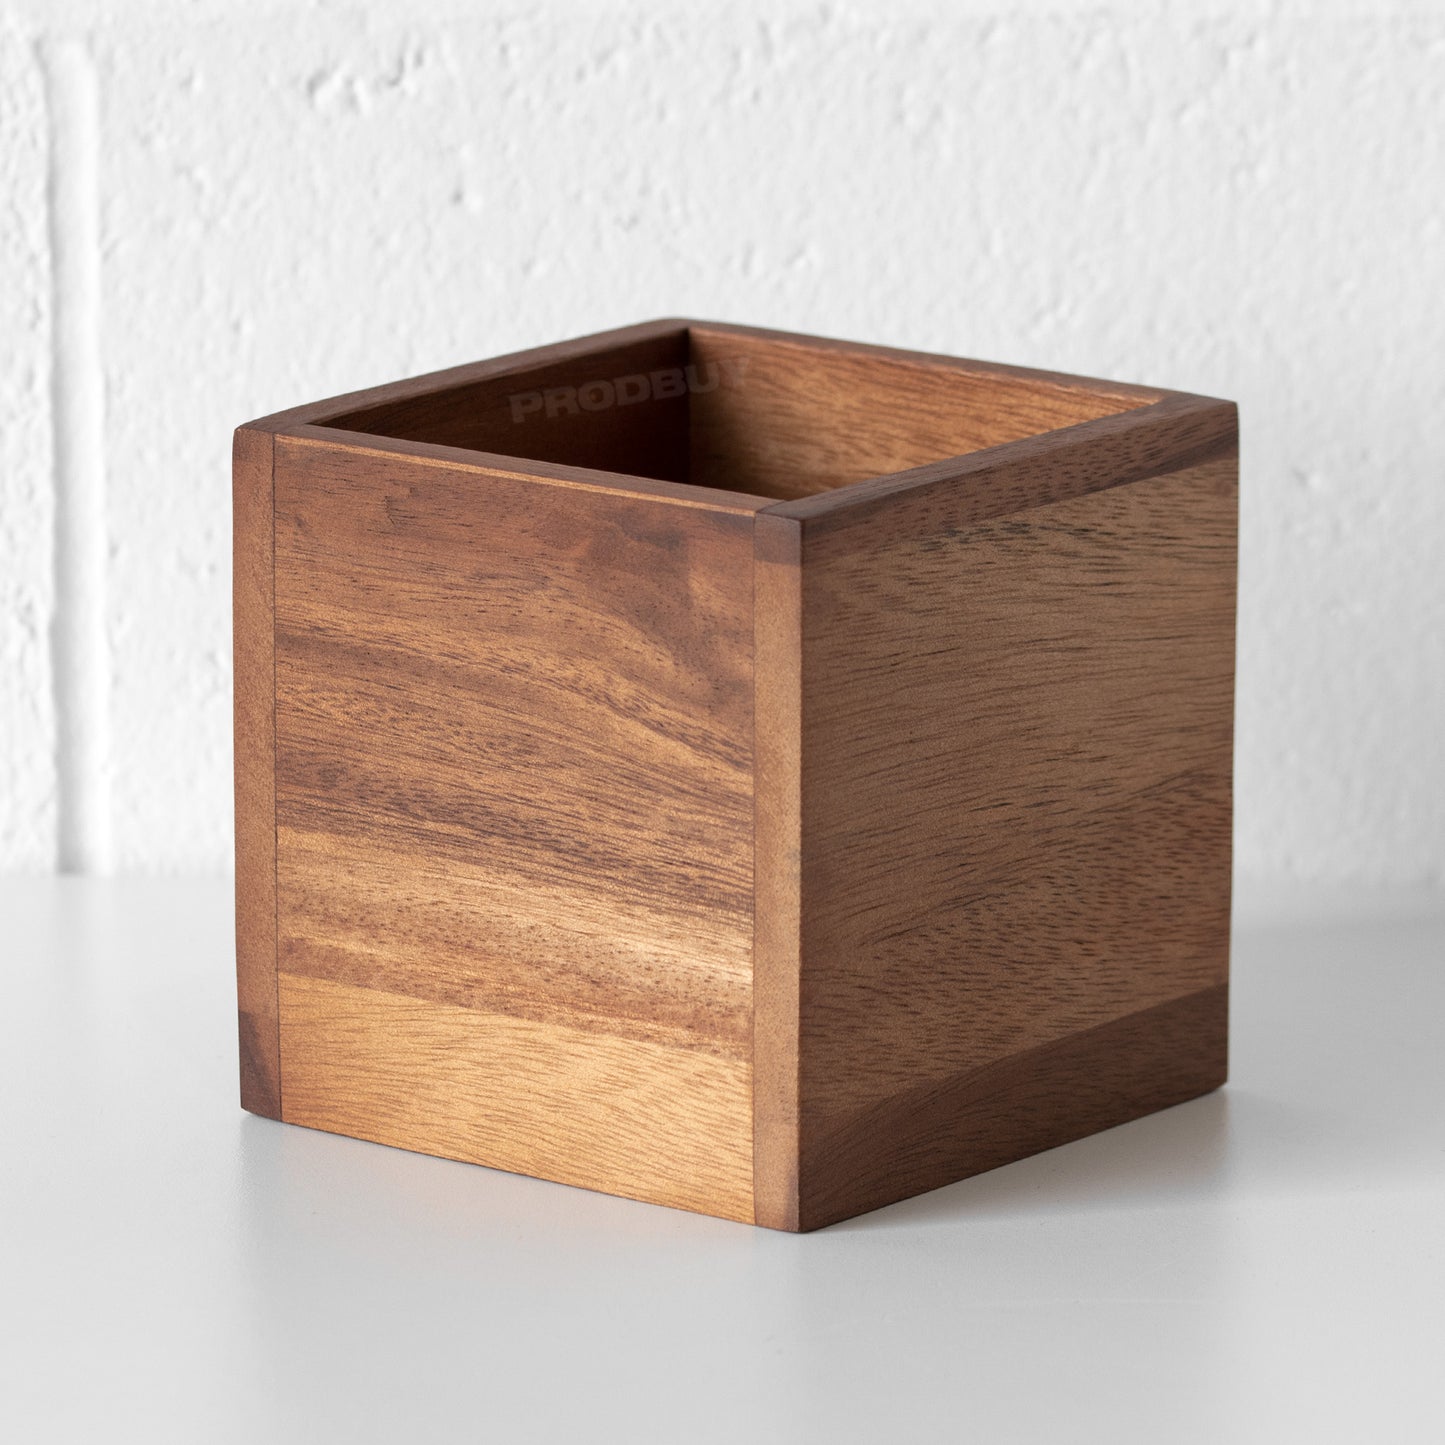 Square Acacia Wood Utensil Holder Cutlery Caddy